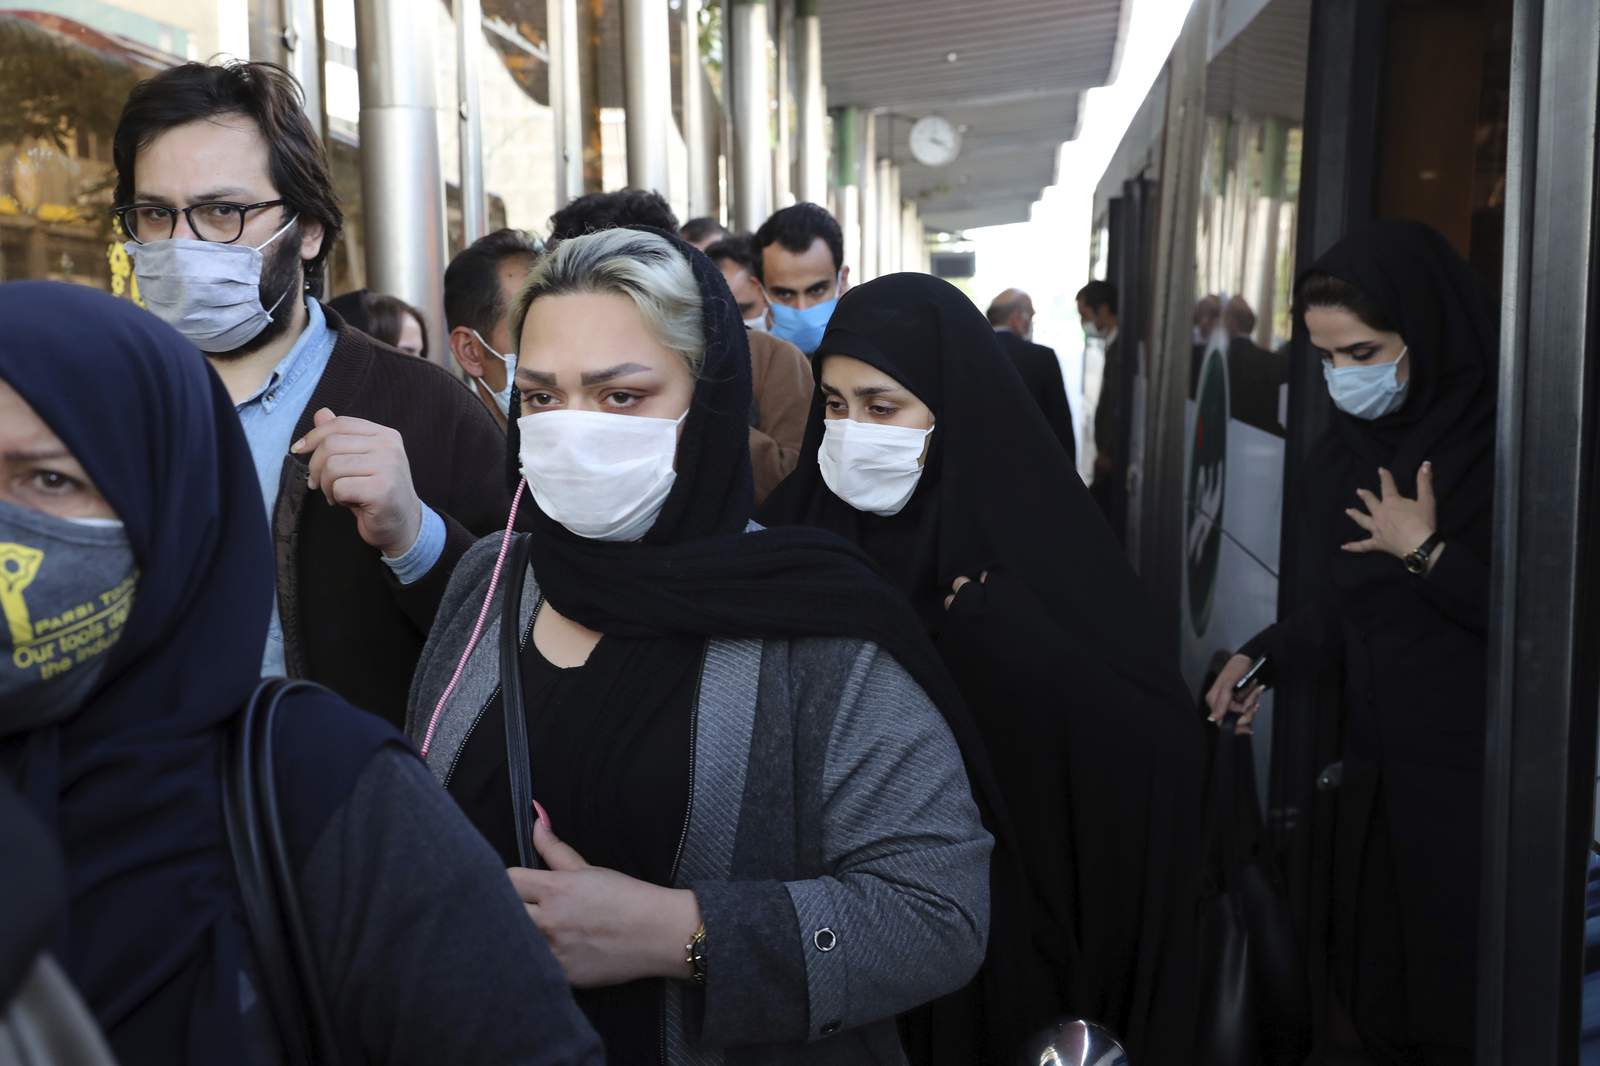 Iran has highest daily virus death toll, new patient count